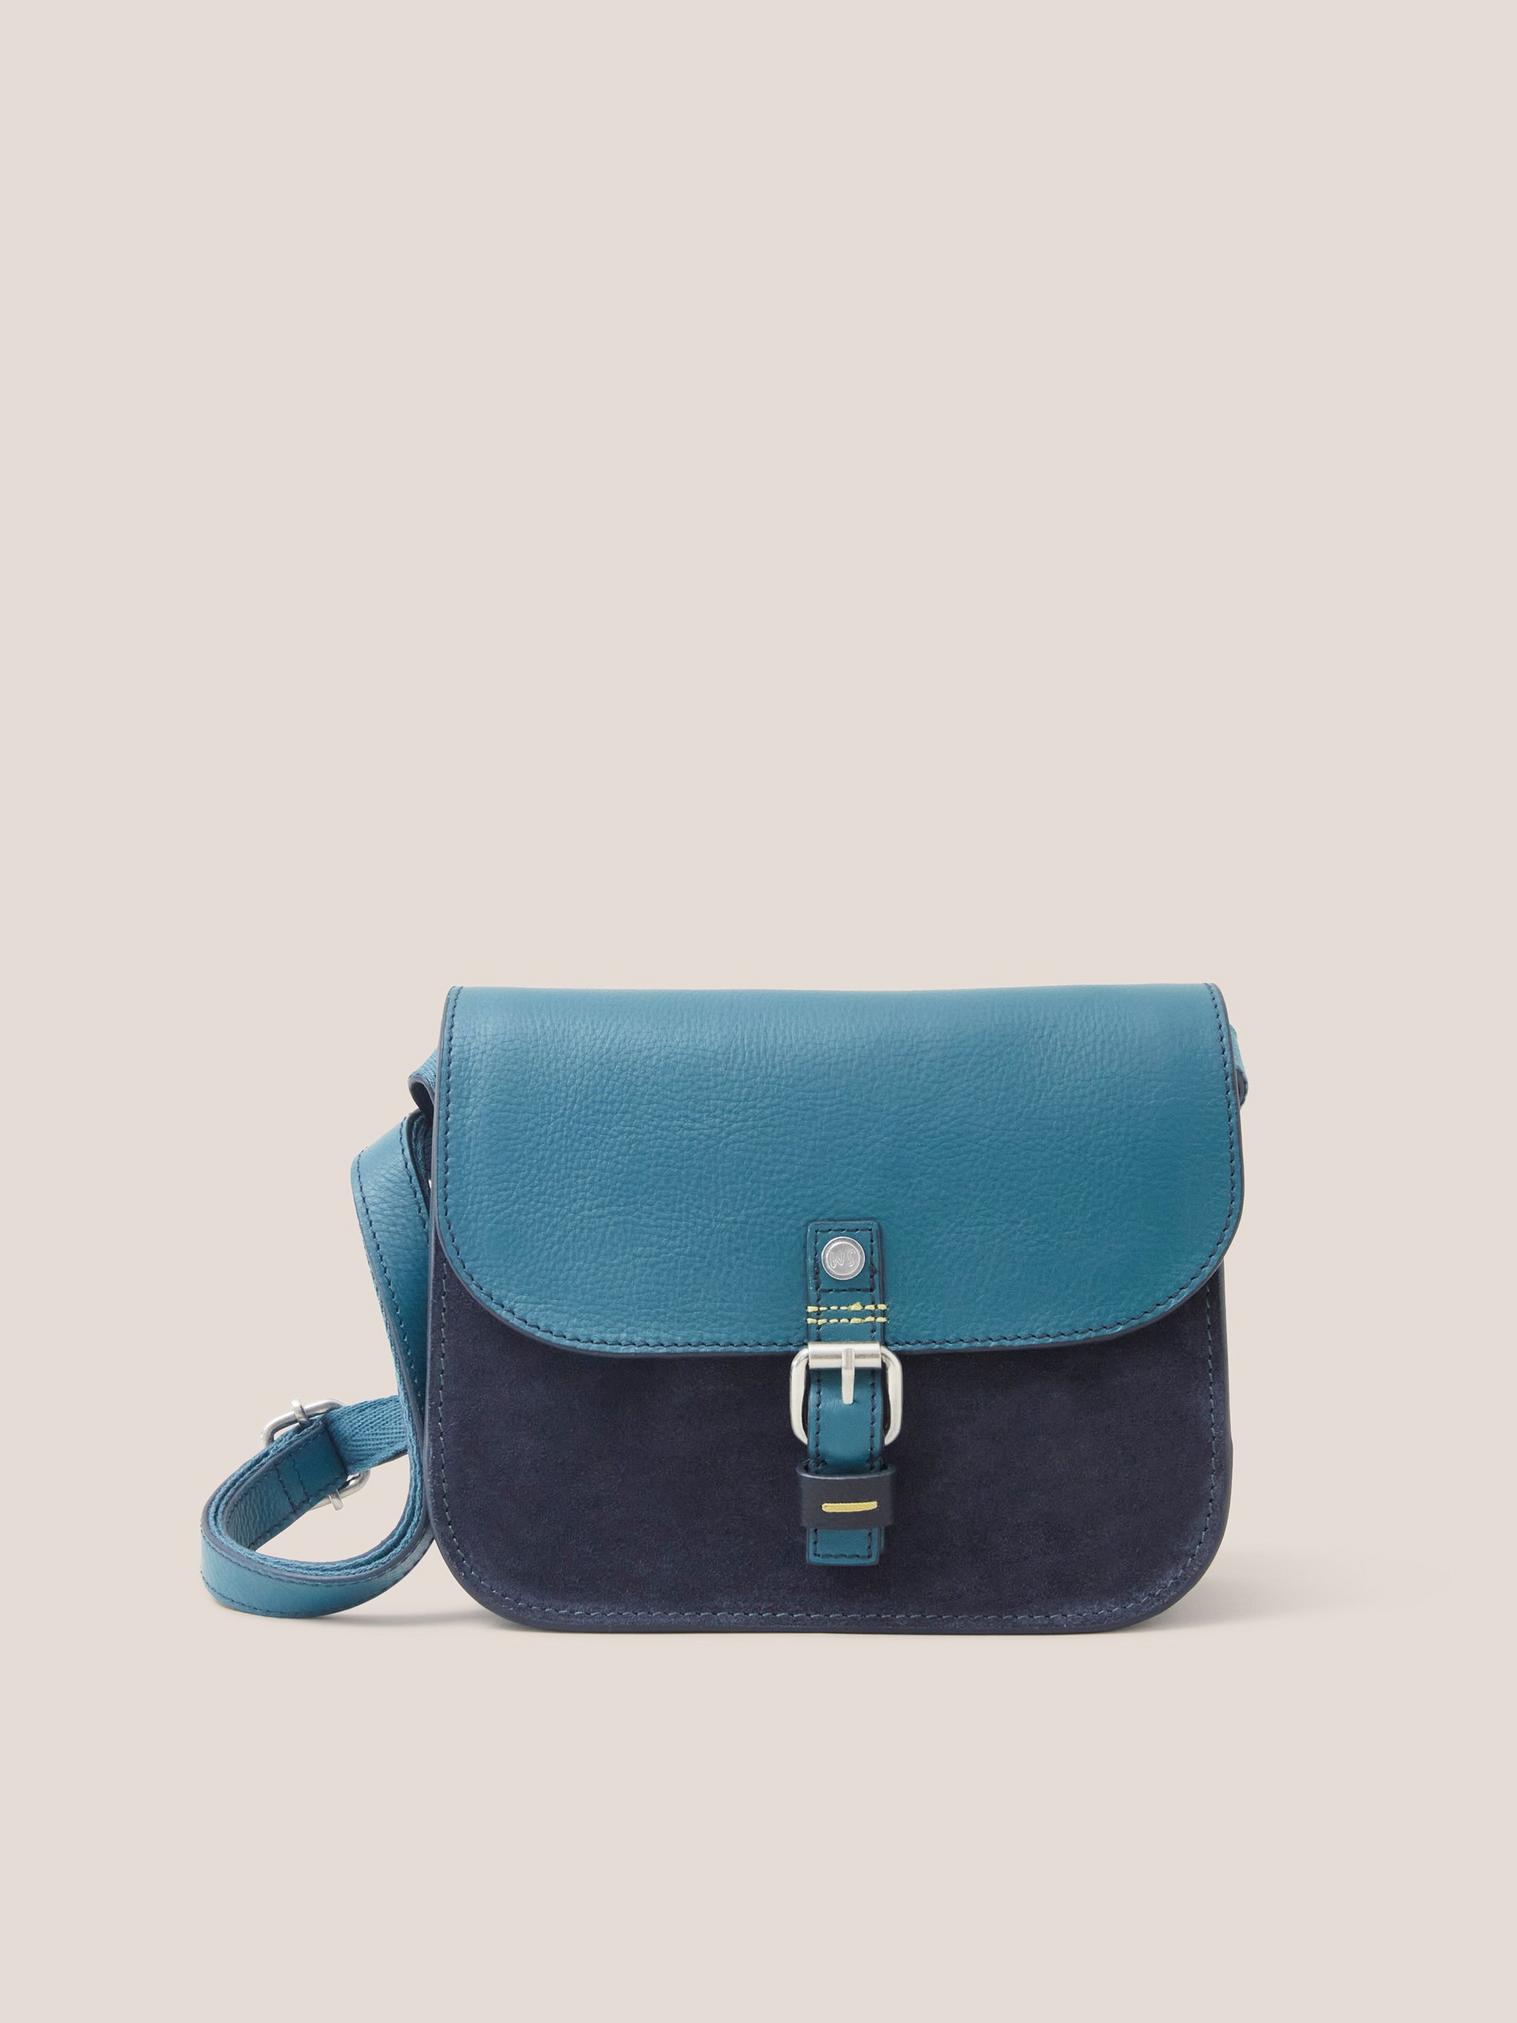 Eve Leather Satchel in TEAL MLT - LIFESTYLE